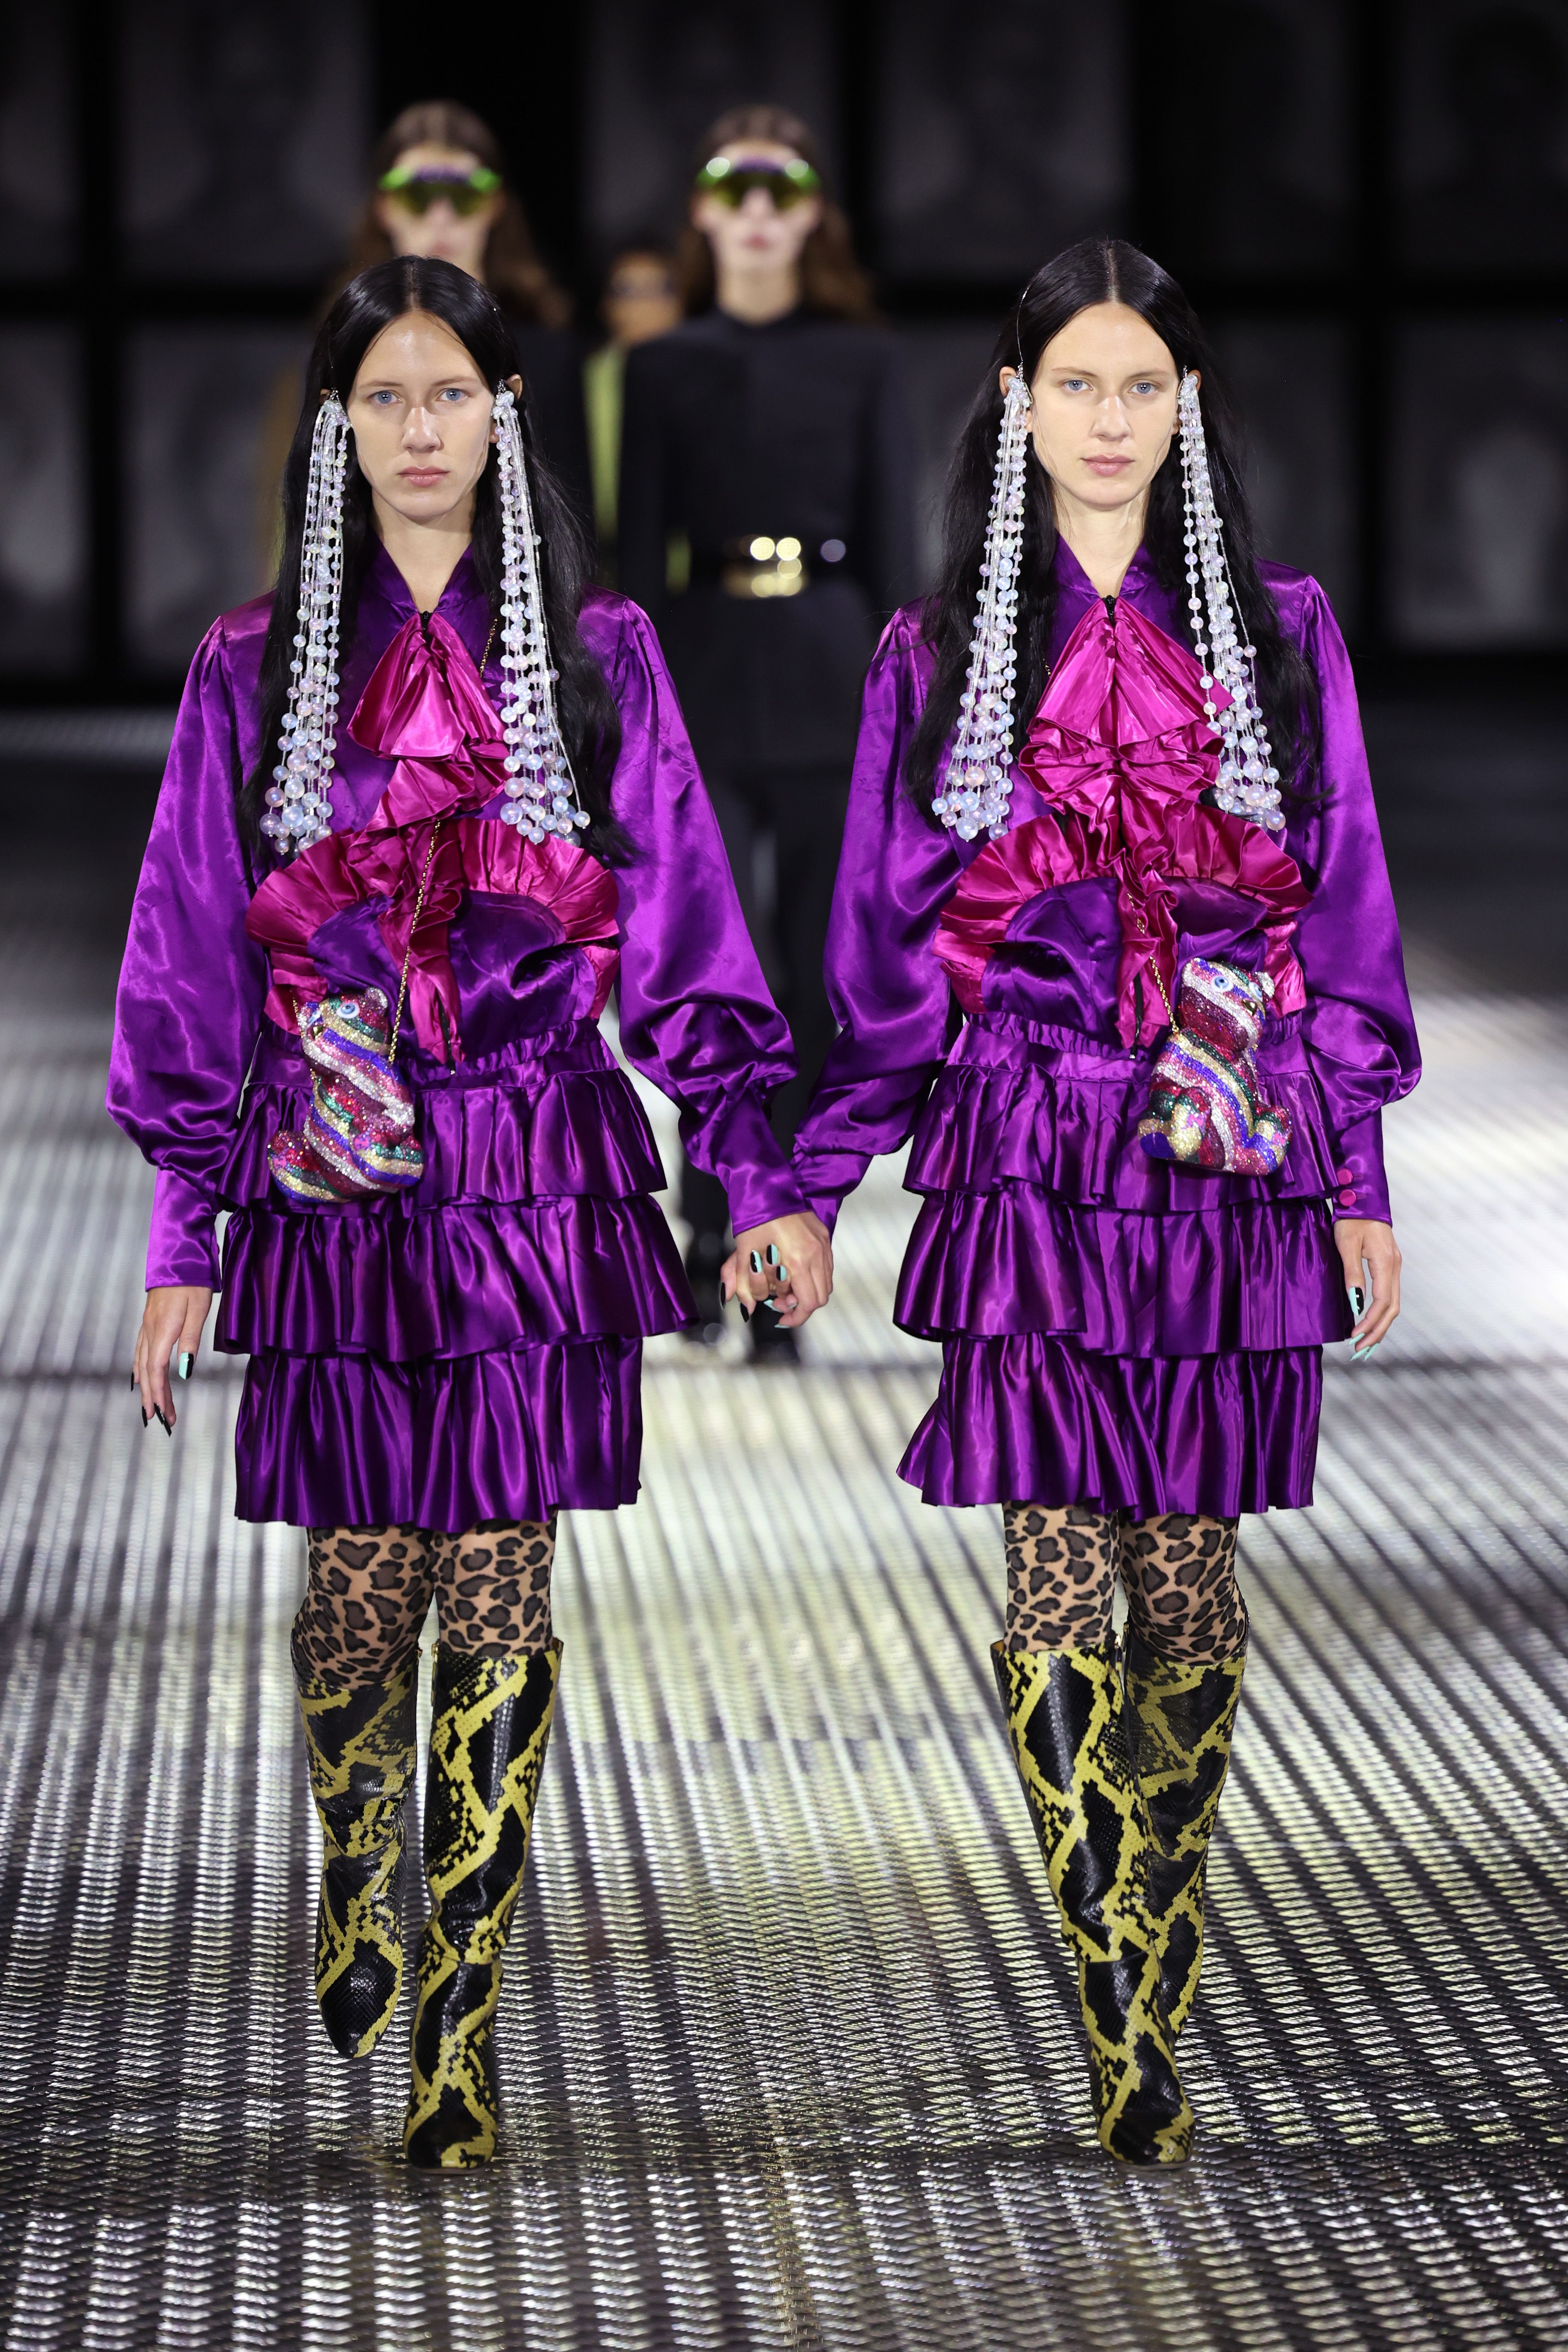 Playing Twinsies at Gucci - The New York Times